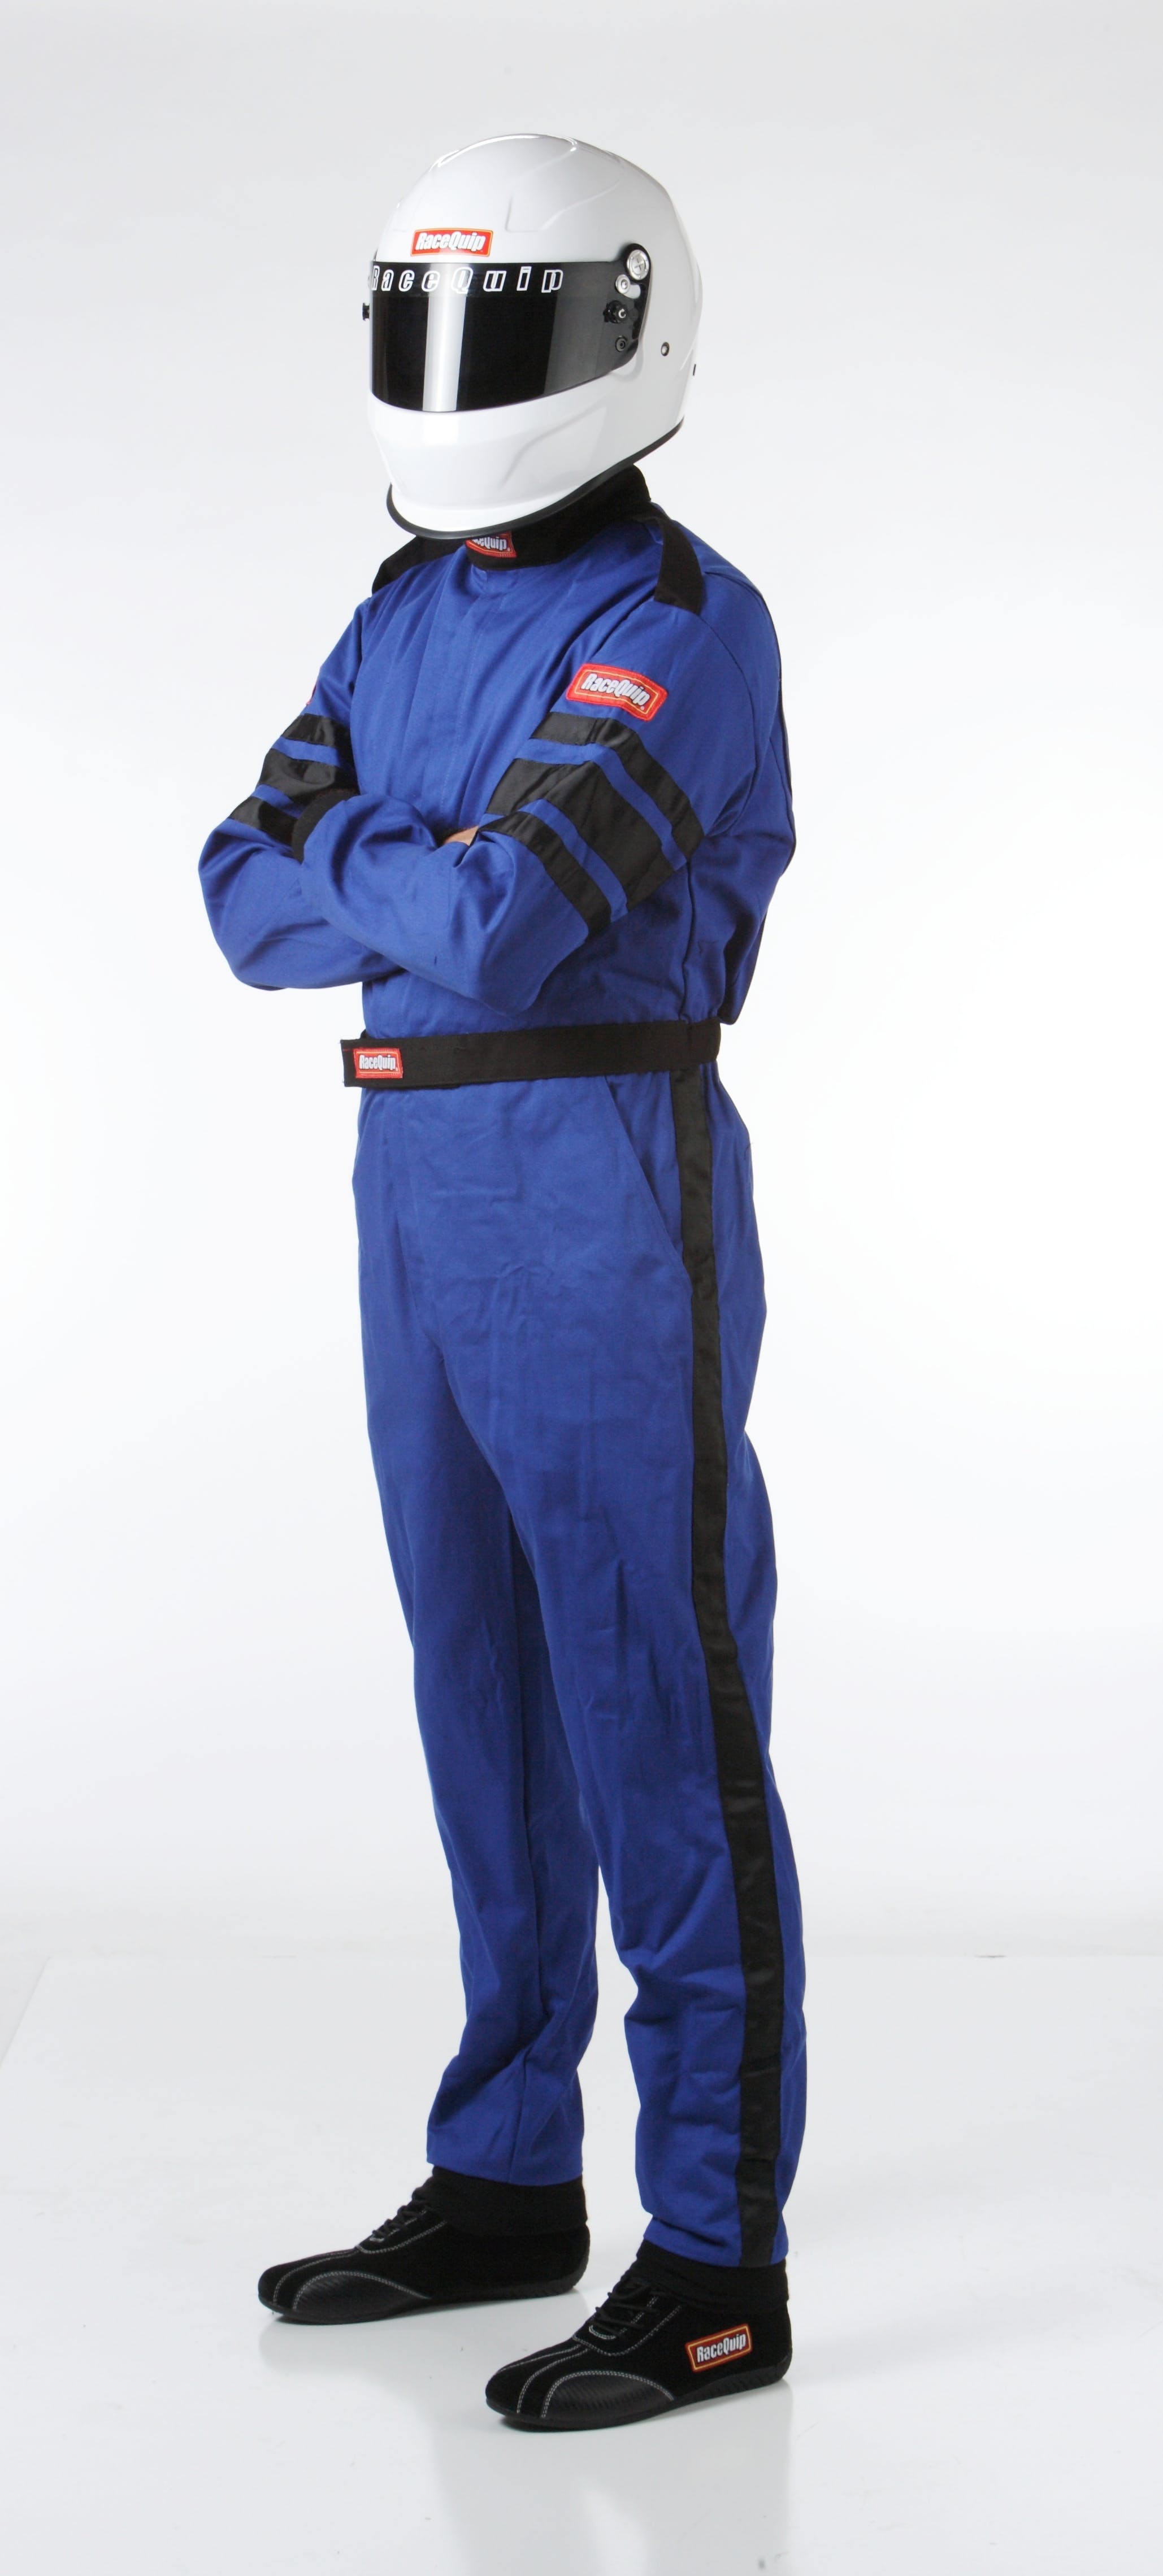 RaceQuip 110025 SFI-1 Pyrovatex One-Piece Single-Layer Racing Fire Suit (Blue, Large)